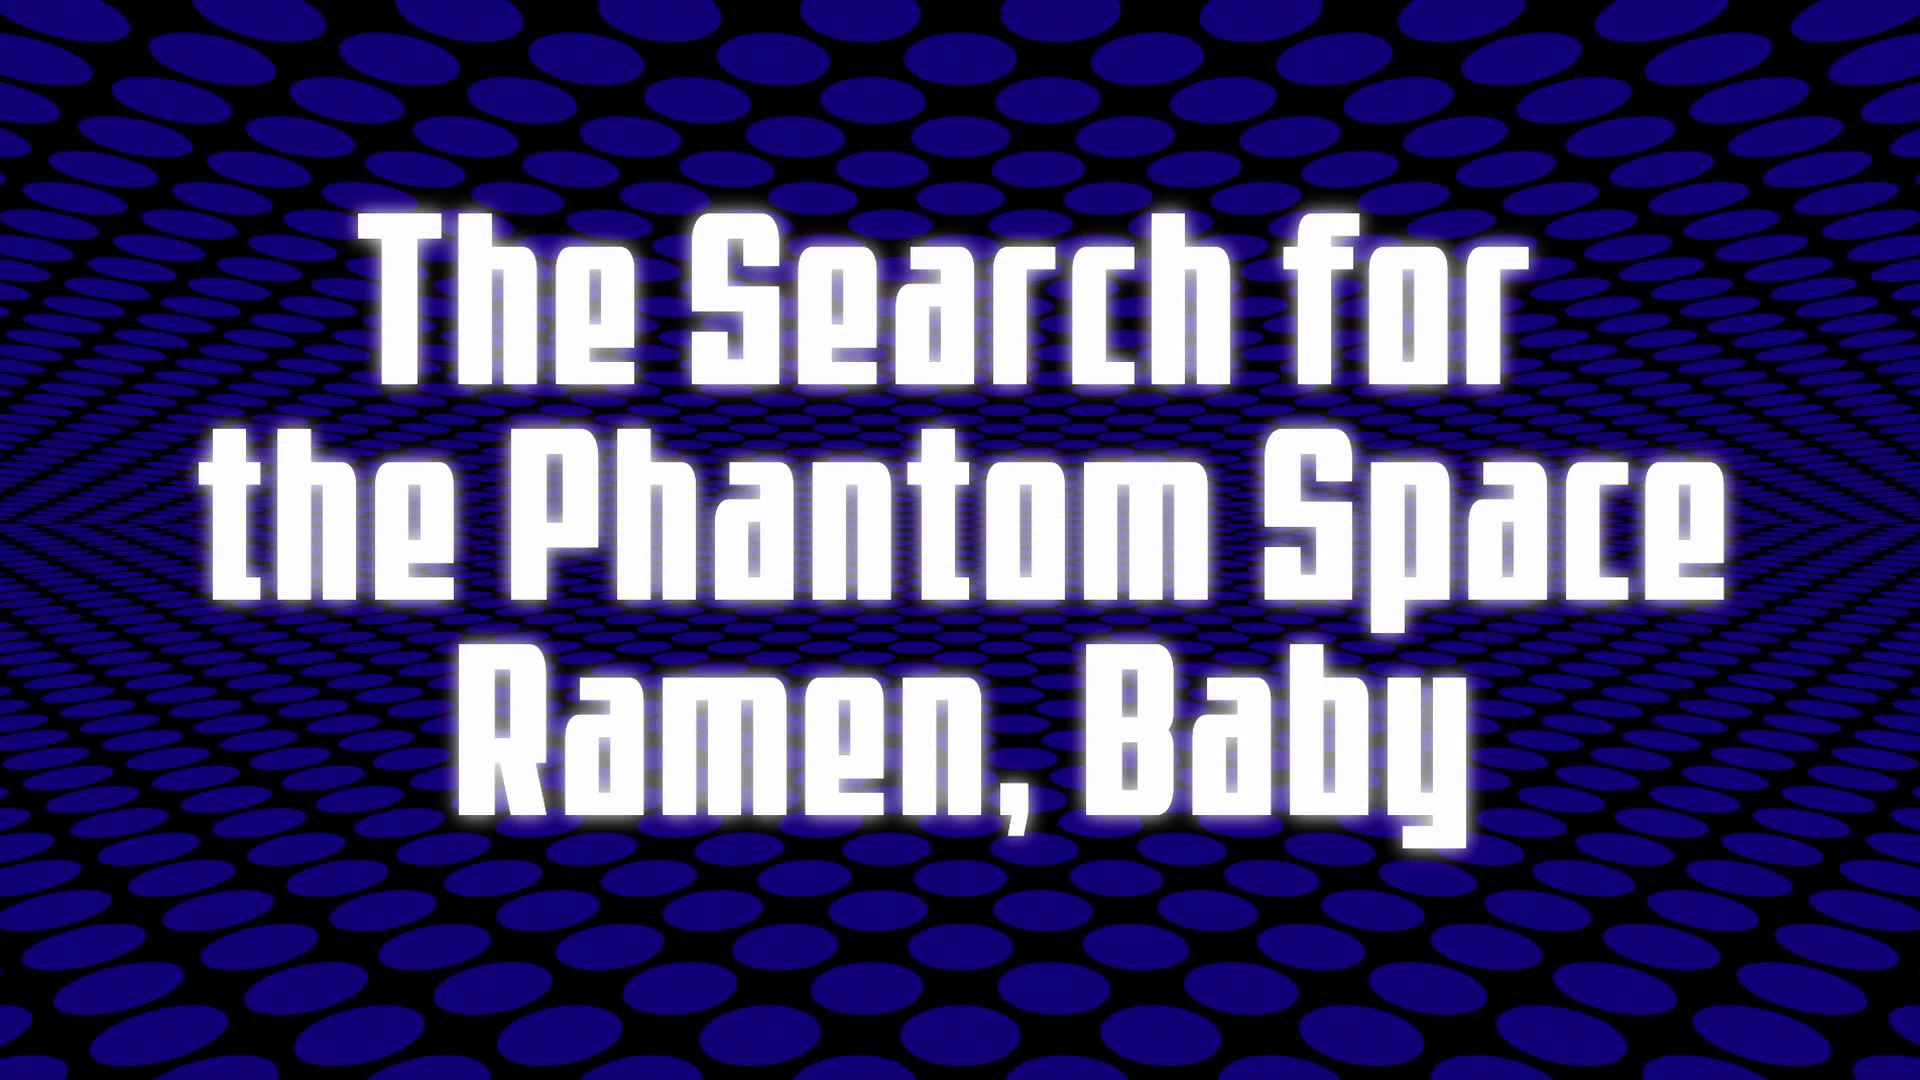 The Search for the Phantom Space Ramen, Baby | Space Dandy Wiki | Fandom